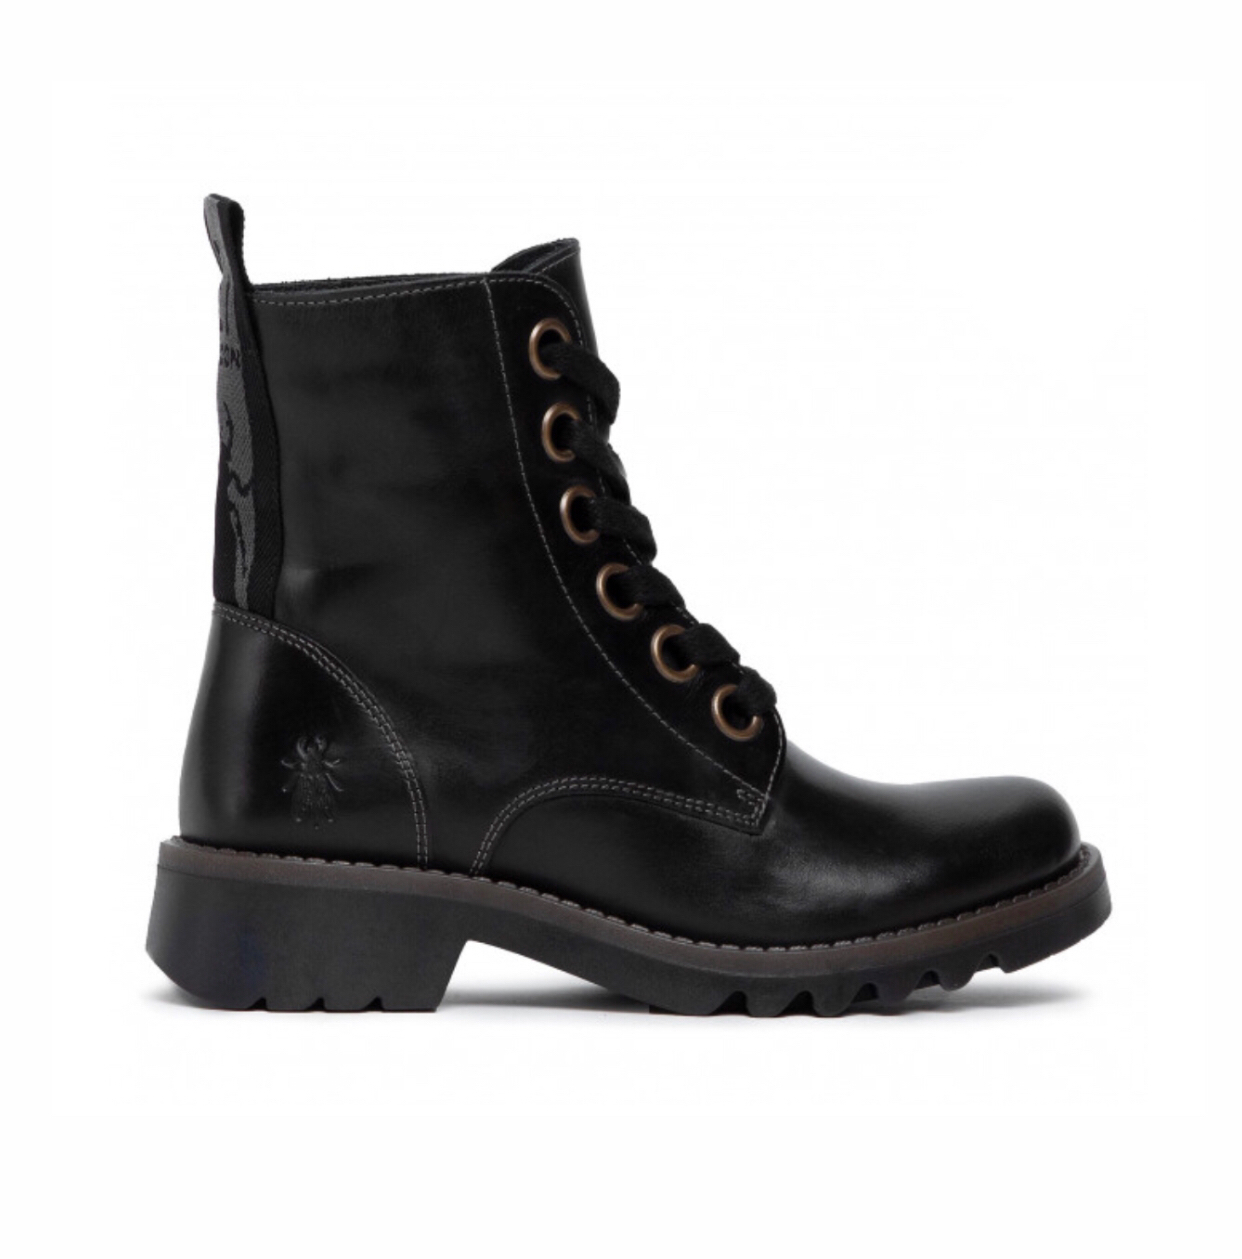 Fly London Ragi539Fly Black 6 Eyelet Ankle Boot Made In Portugal